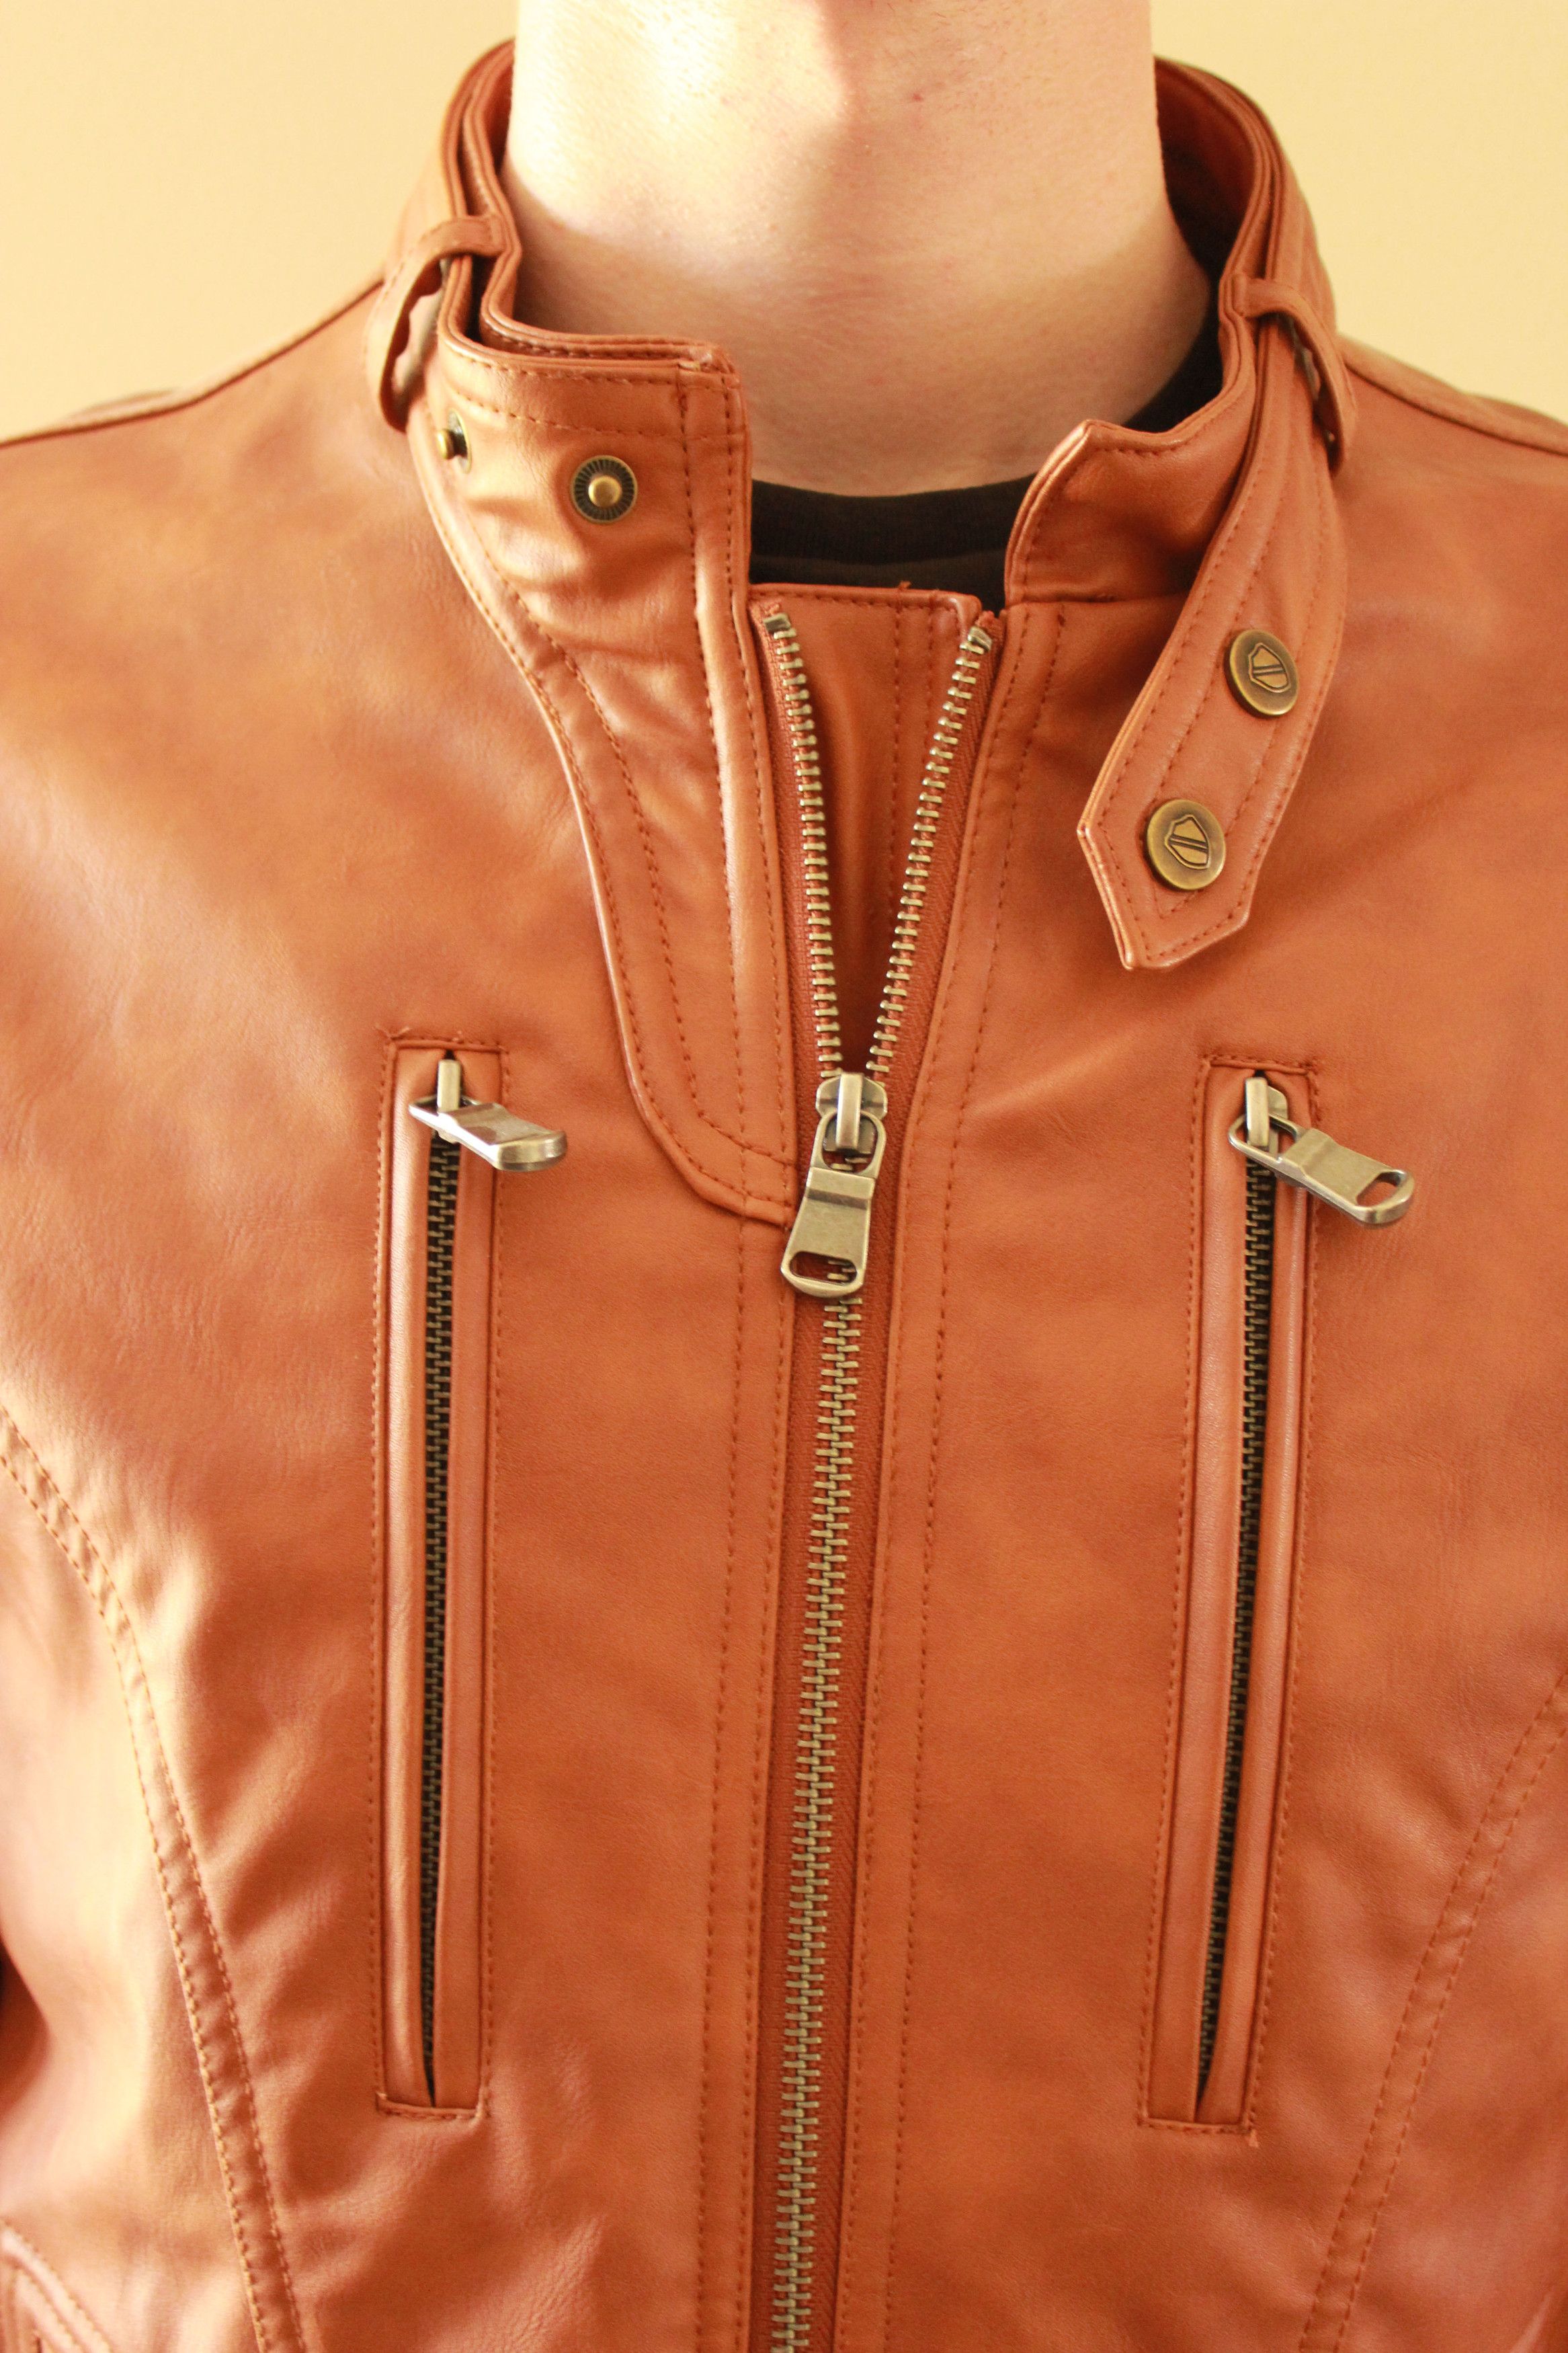 The Academee Brand Caramel Leather-Look Jacket Size US M / EU 48-50 / 2 - 2 Preview